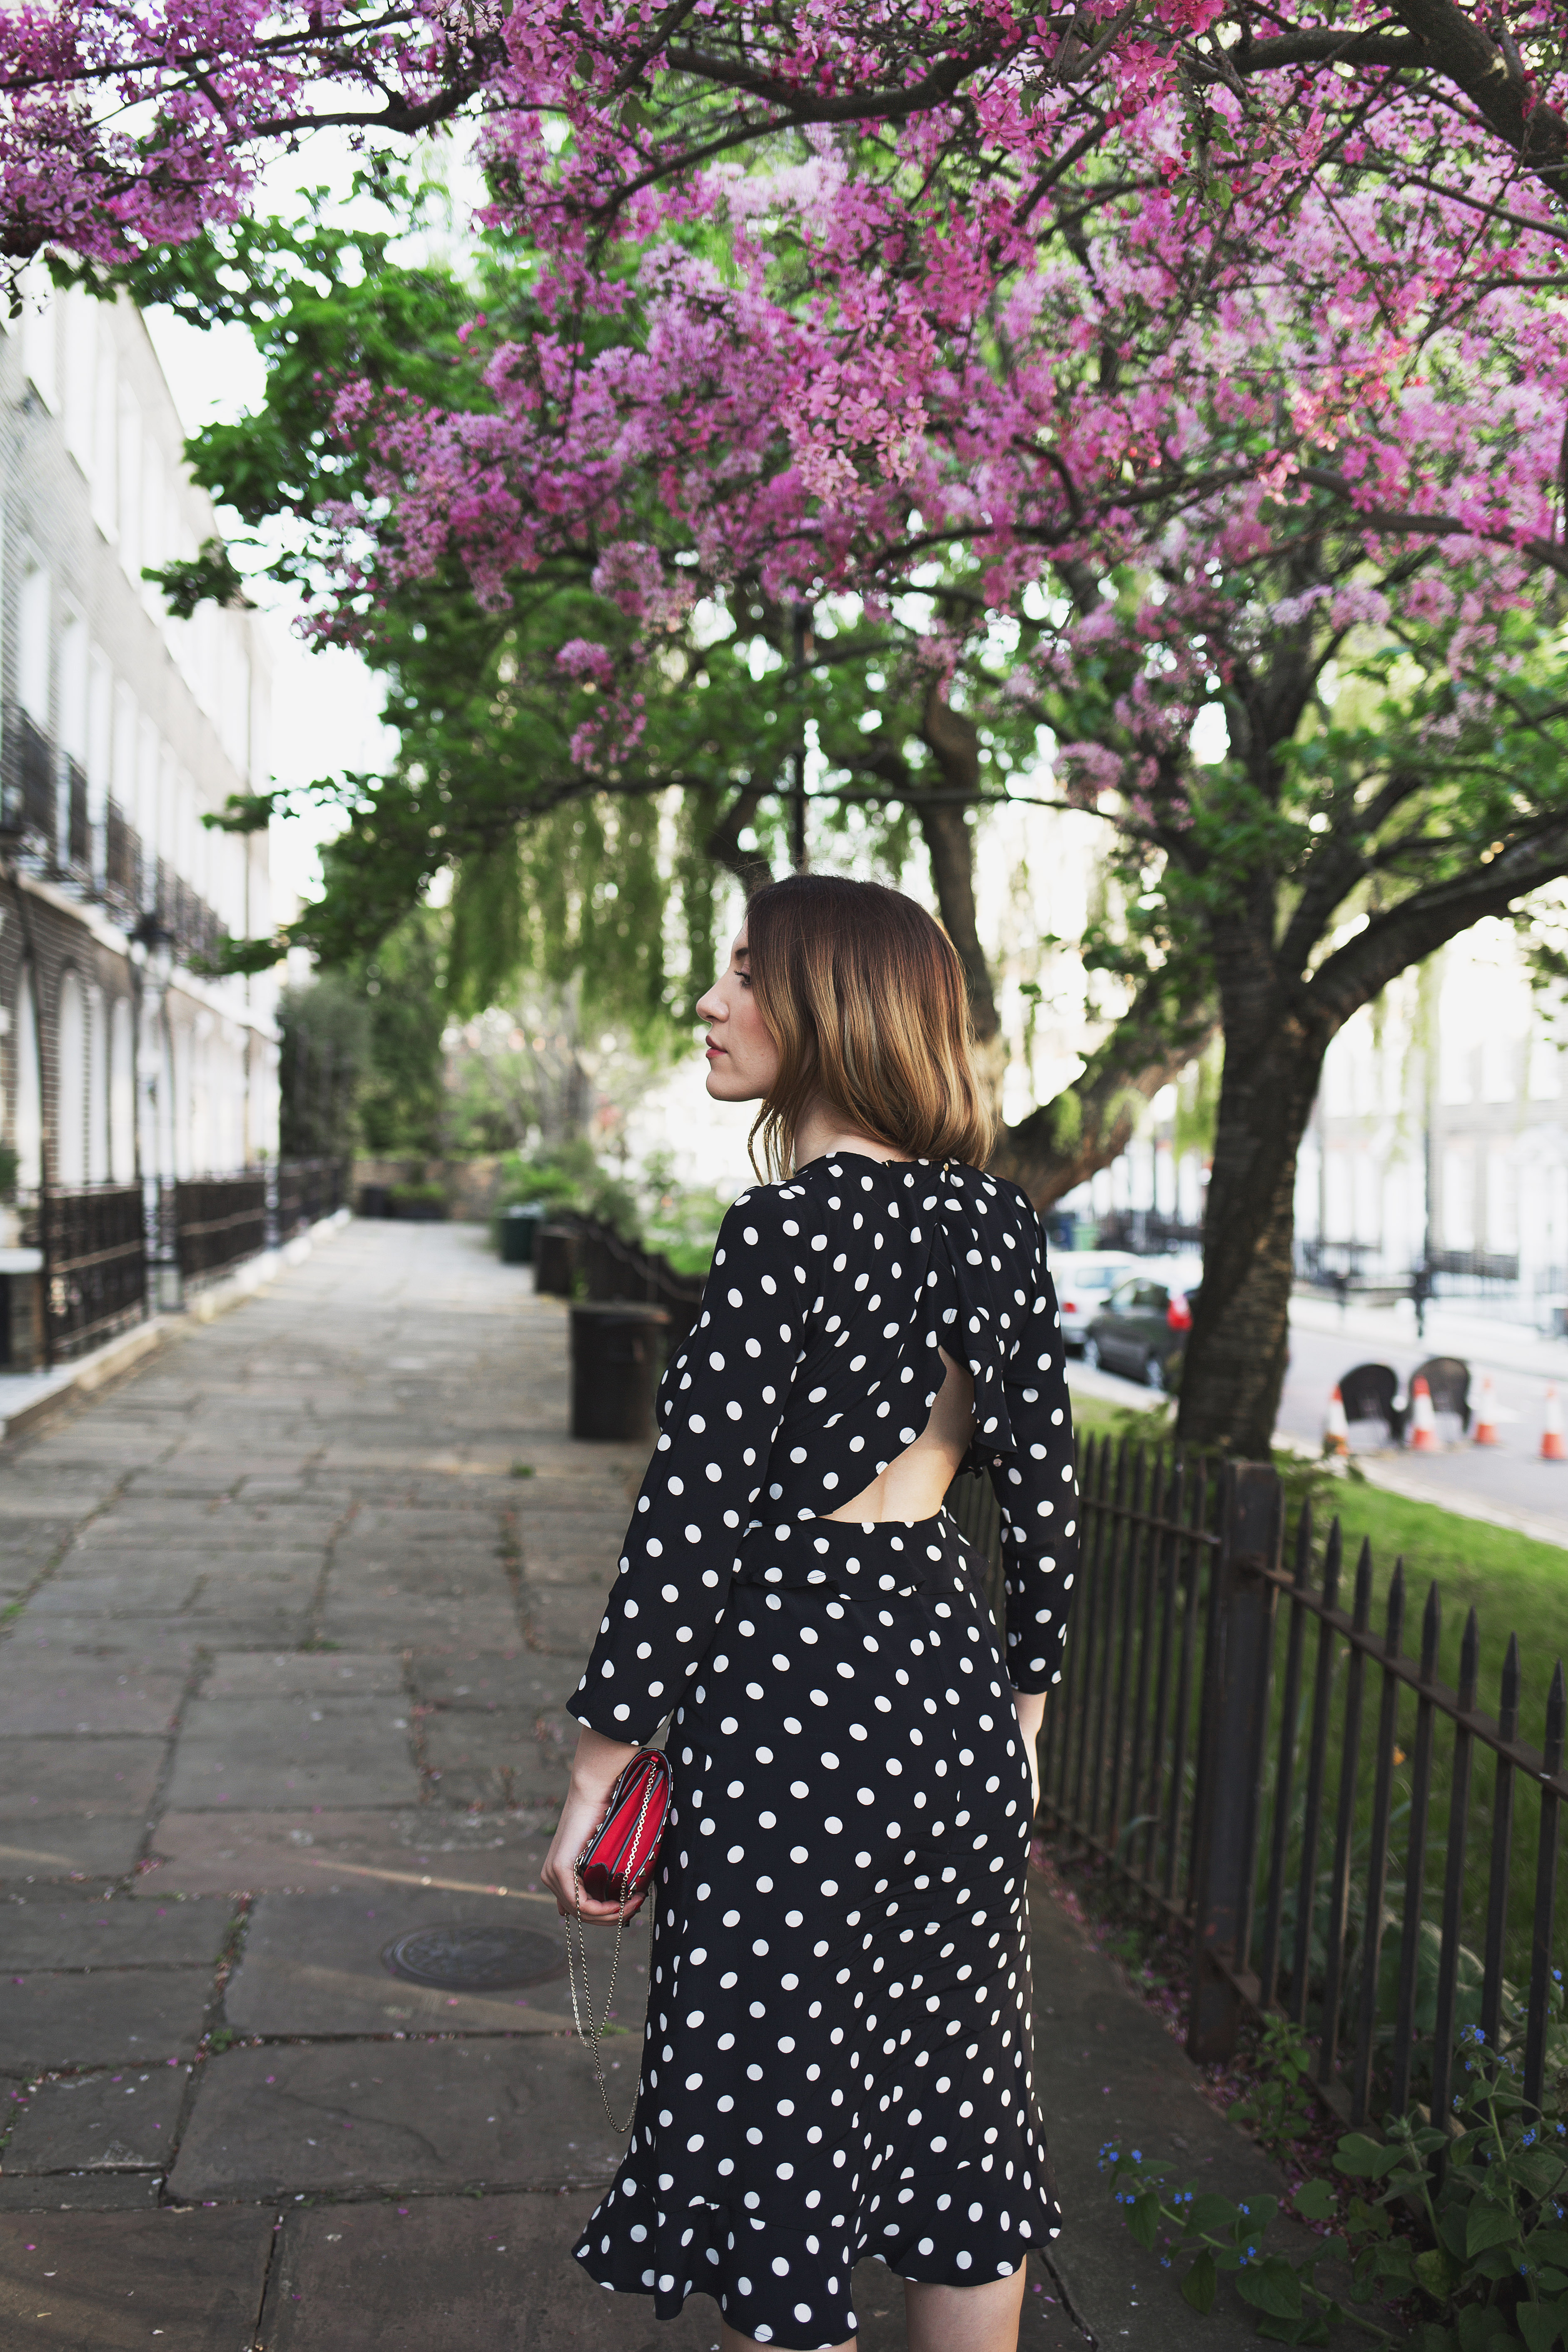 SS17 Trend Must Have: A Polka Dot Dress